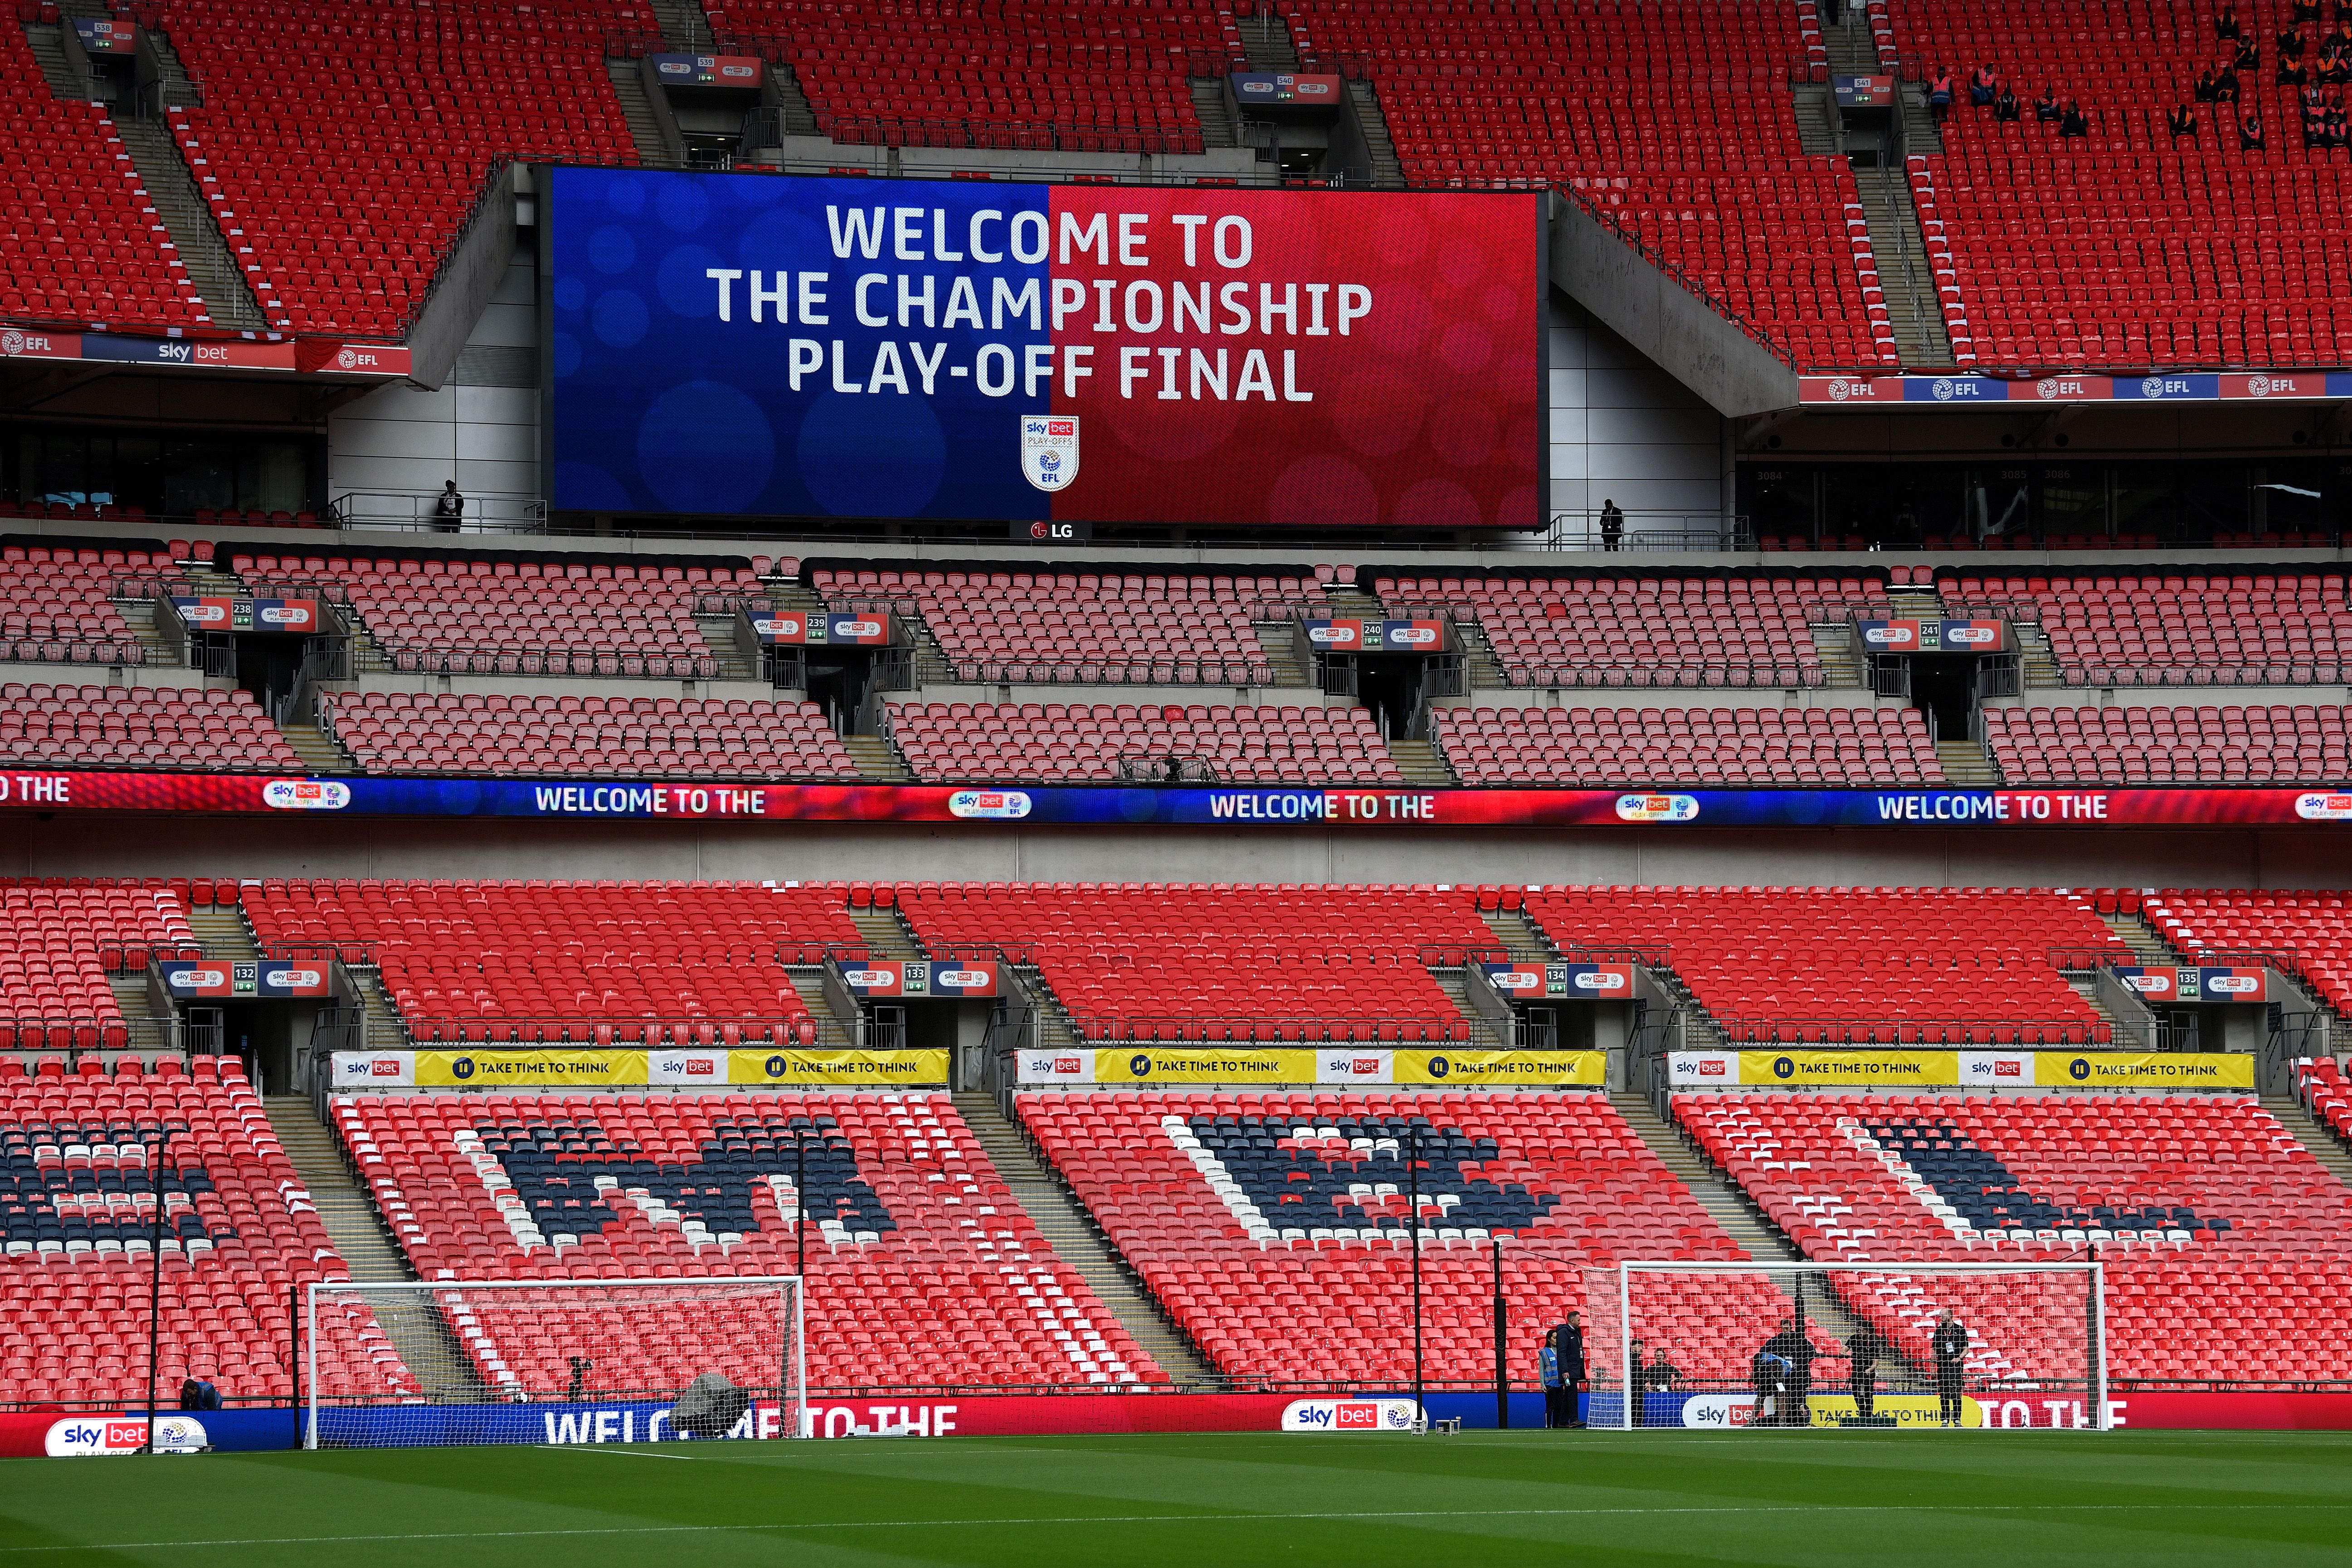 A general view of the stadium ahead of the Sky Bet Championship Play-Off Final match between Huddersfield Town and Nottingham Forest at Wembley Stadium on May 29, 2022 in London, England.